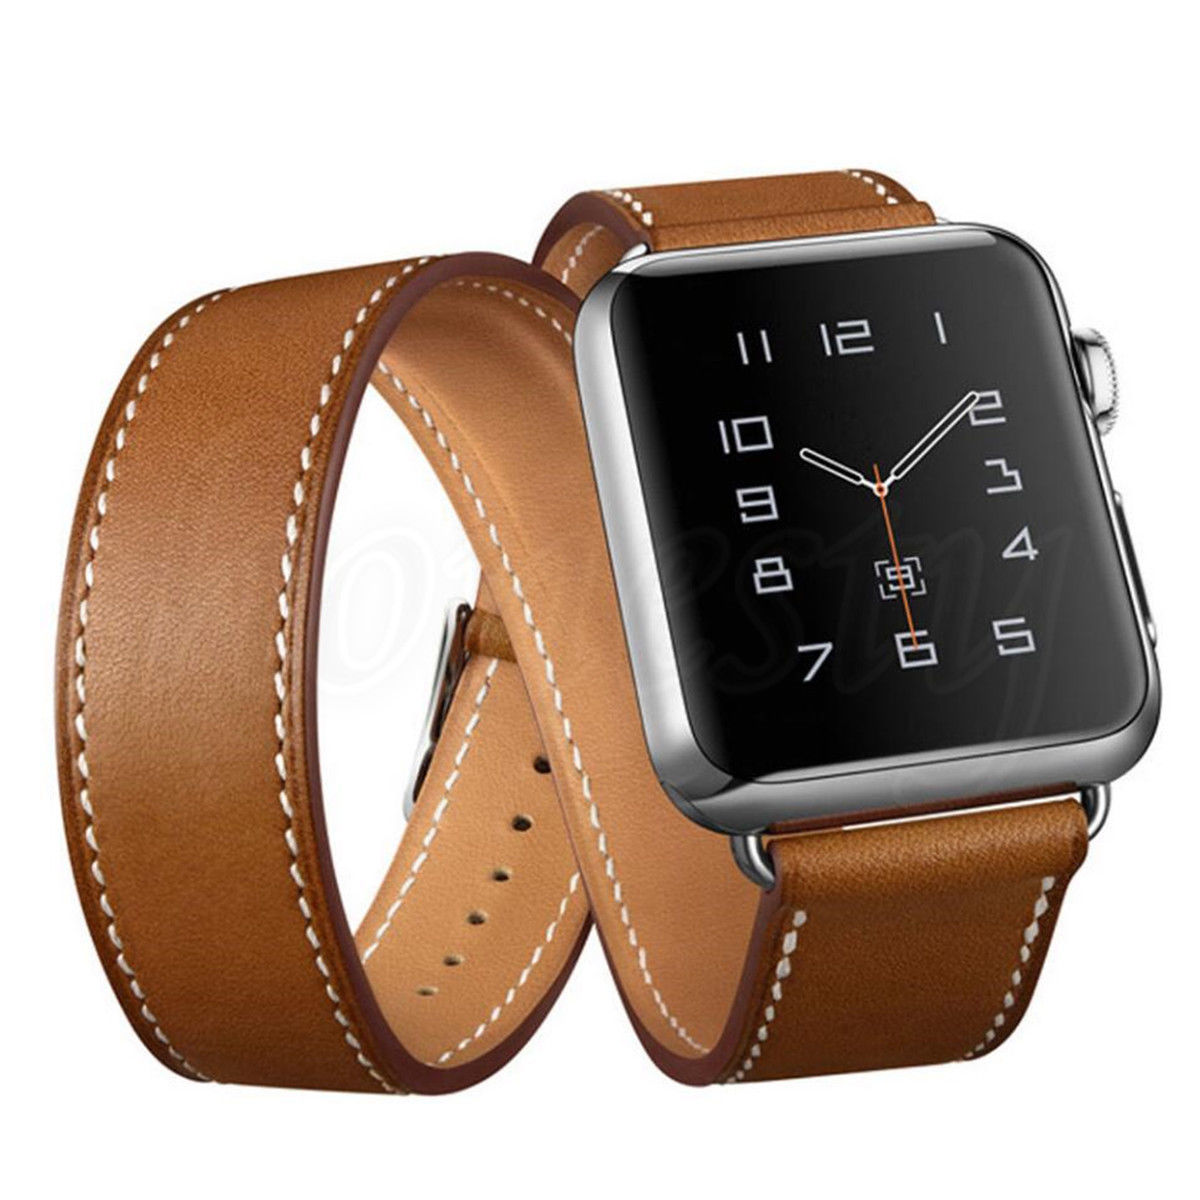 

Genuine Leather Watch Band Strap Replacement For Apple Watch Series 1 42mm